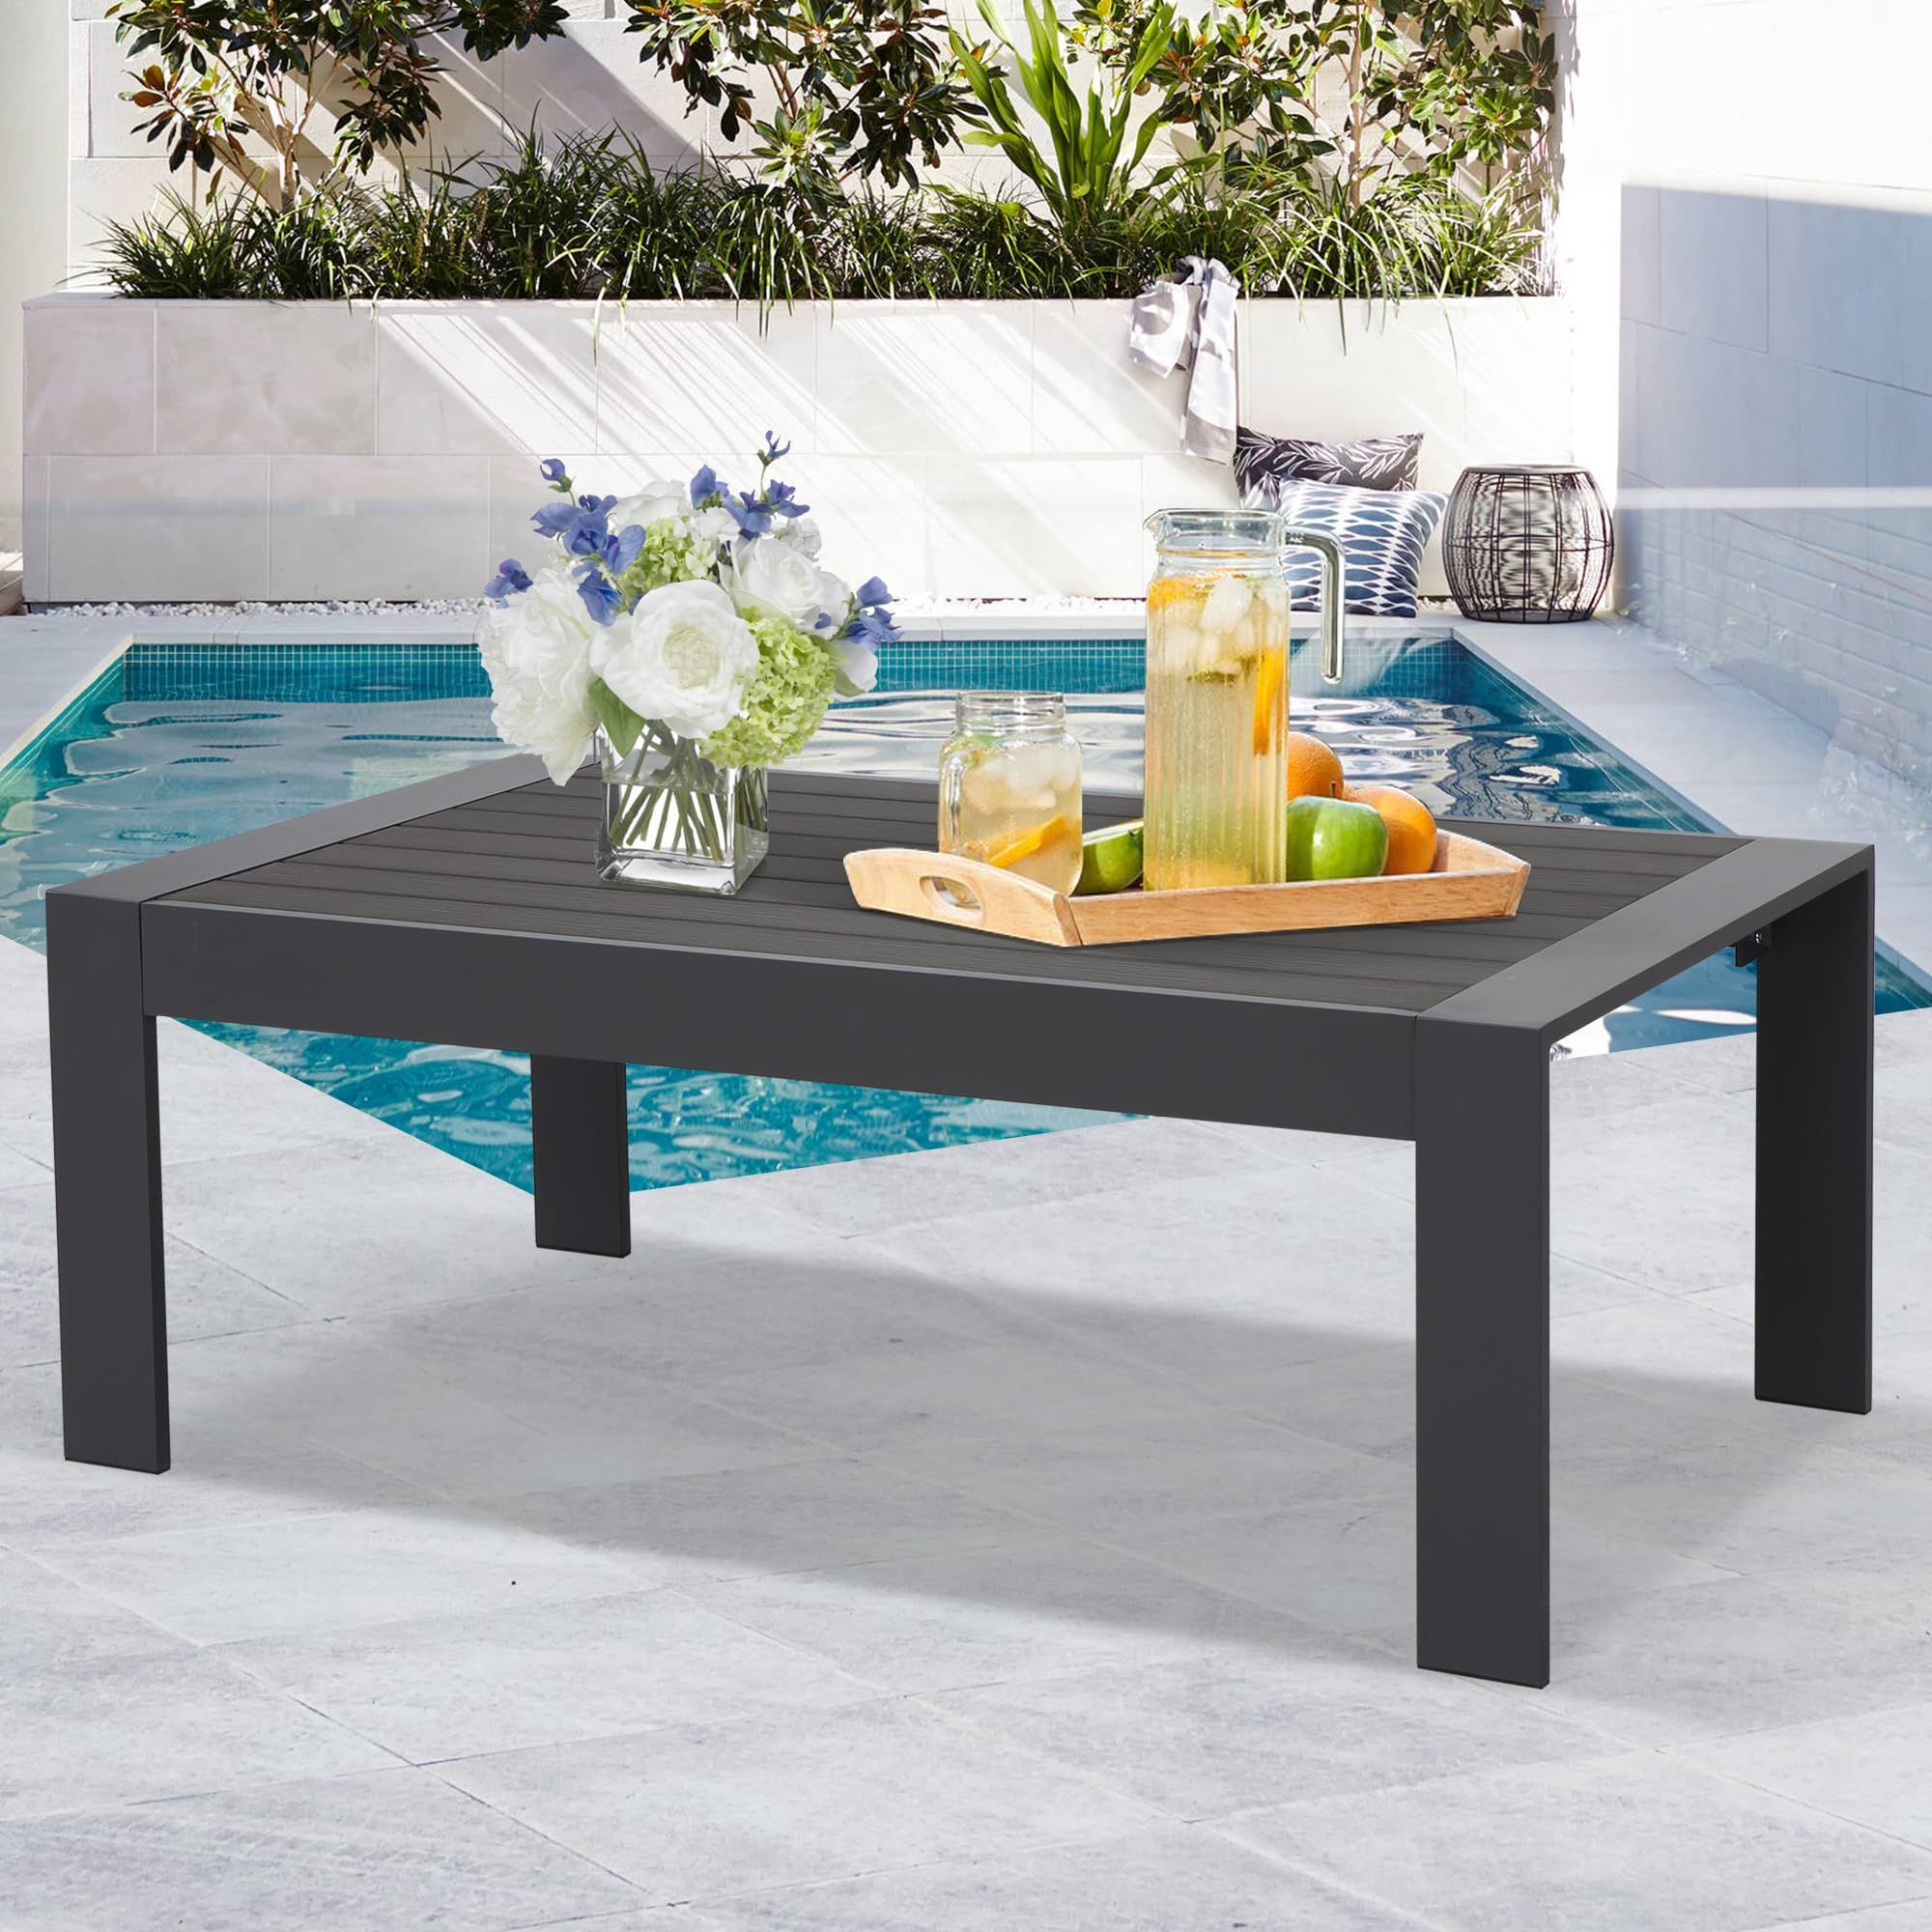 Amazon: Odoor Direct Outdoor Coffee Table For Patio, Aluminum Patio  Coffee Table With Imitation Wood, Metal Modern Coffee Table For Balcony,  Backyard, Porch, Dark Grey : Patio, Lawn & Garden Pertaining To Well Known Modern Outdoor Patio Coffee Tables (View 4 of 10)